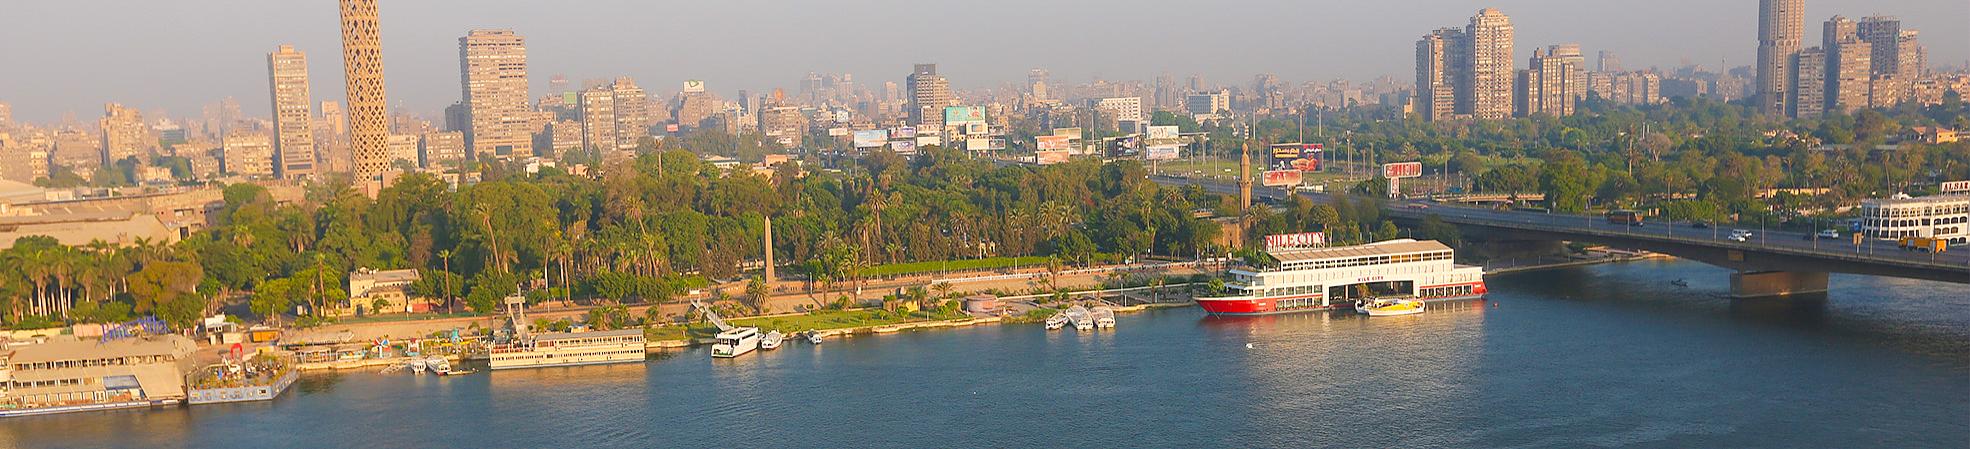 A Complete Guide for Travelling to Cairo